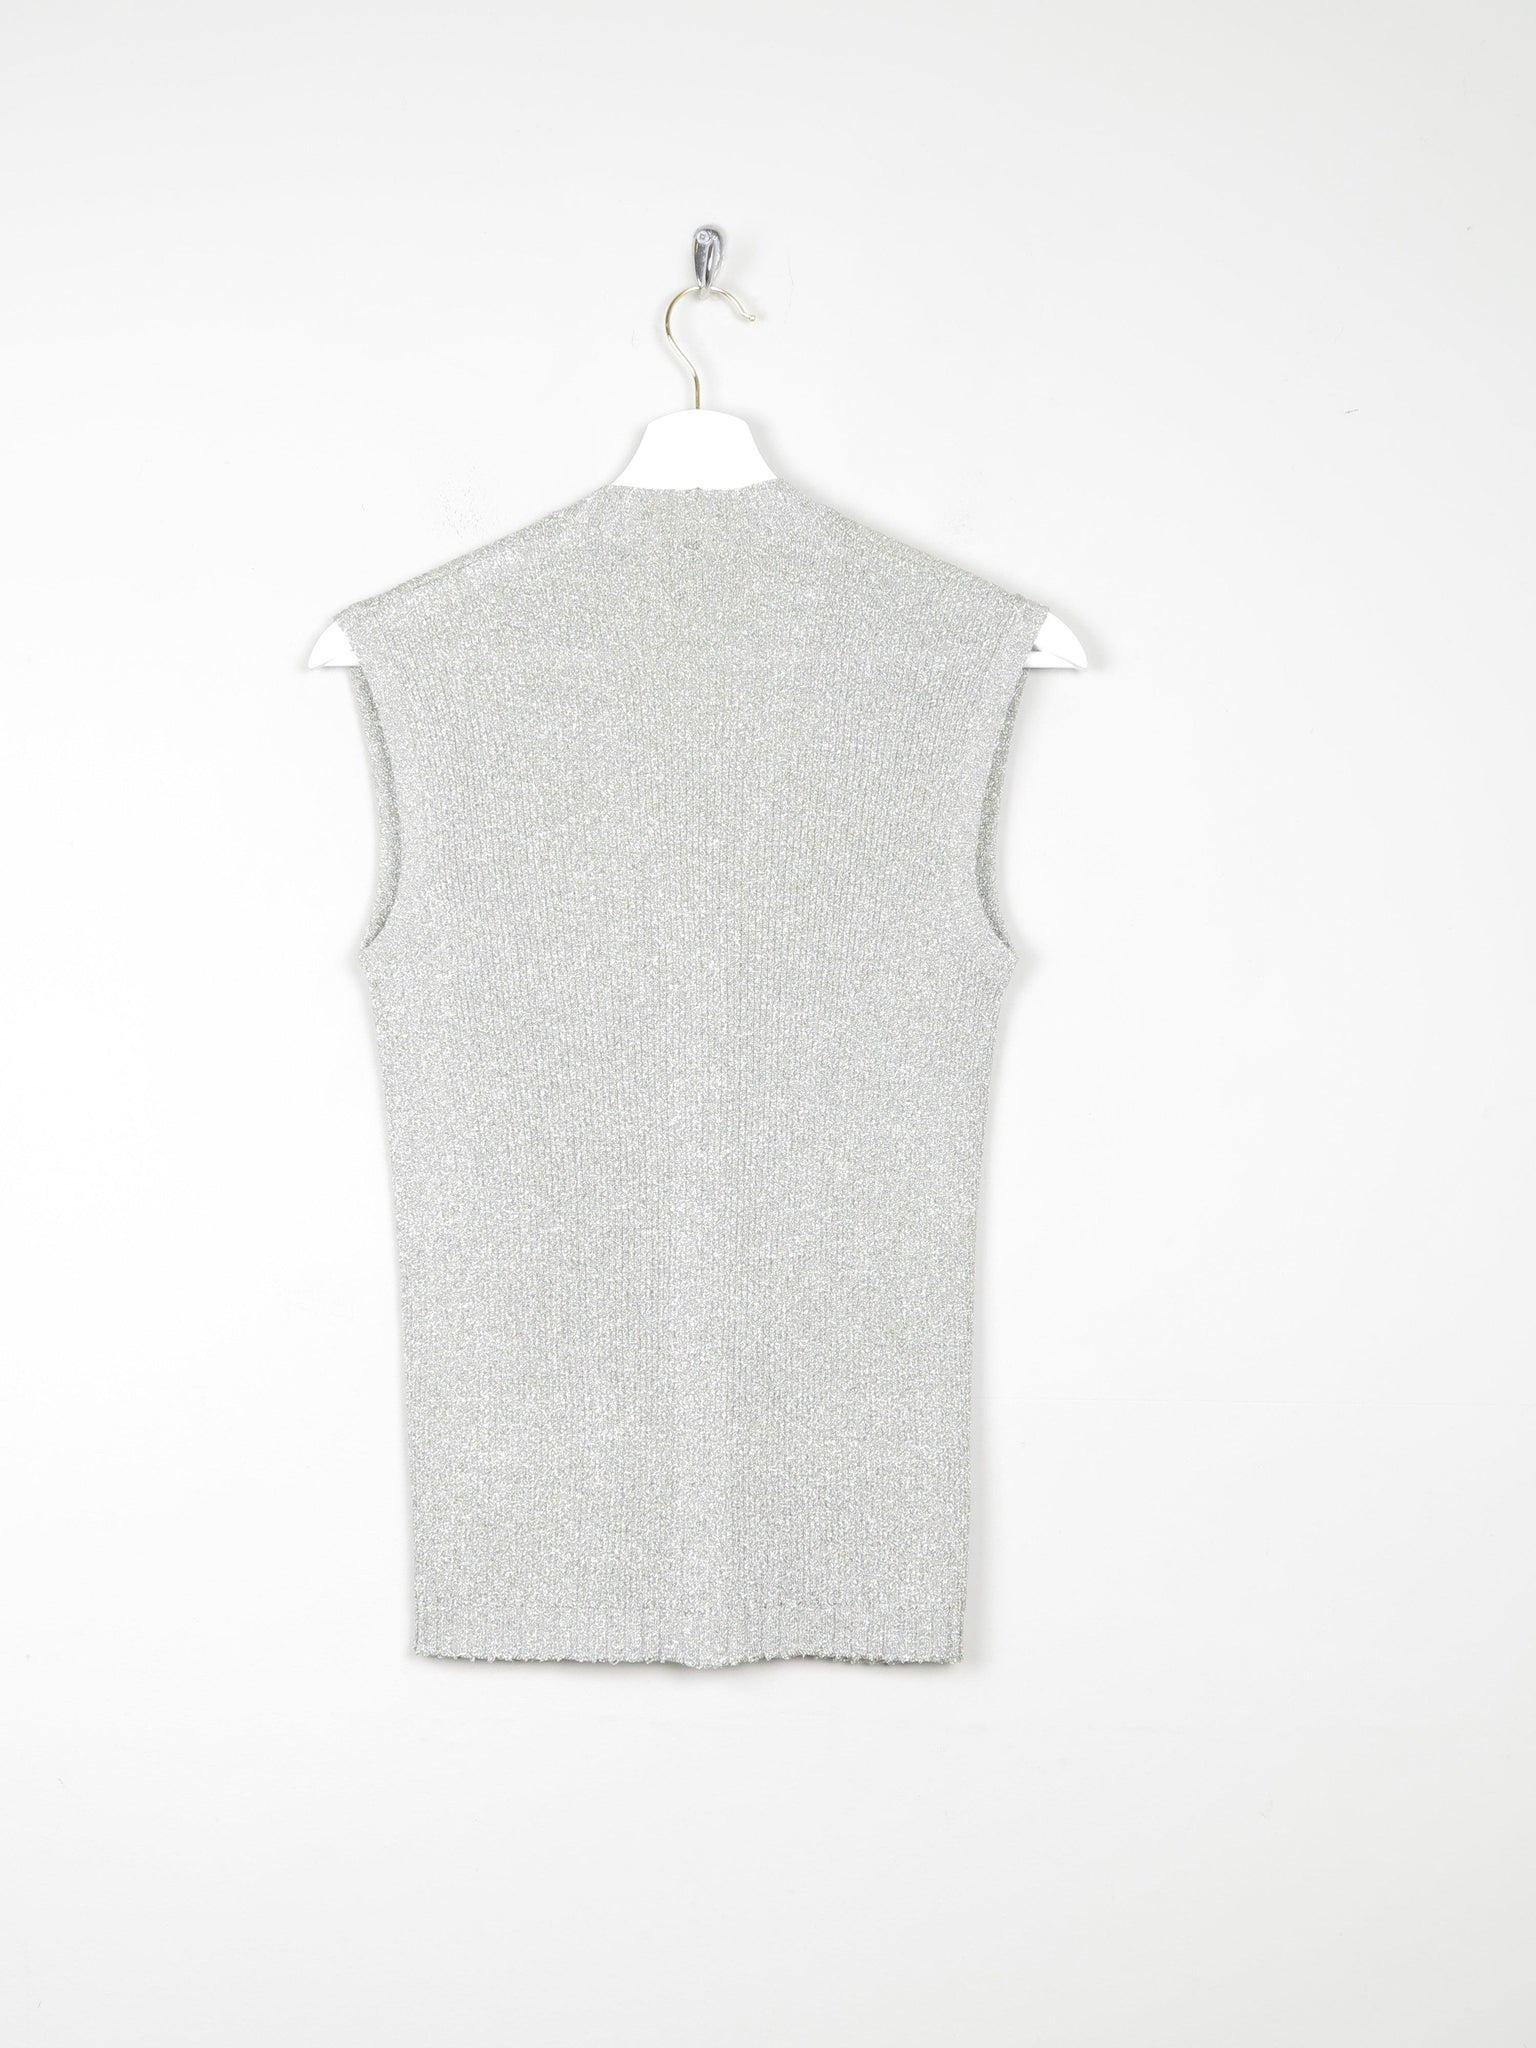 Women's Silver Lurex Ribbed 1970s Waistcoat S/M - The Harlequin